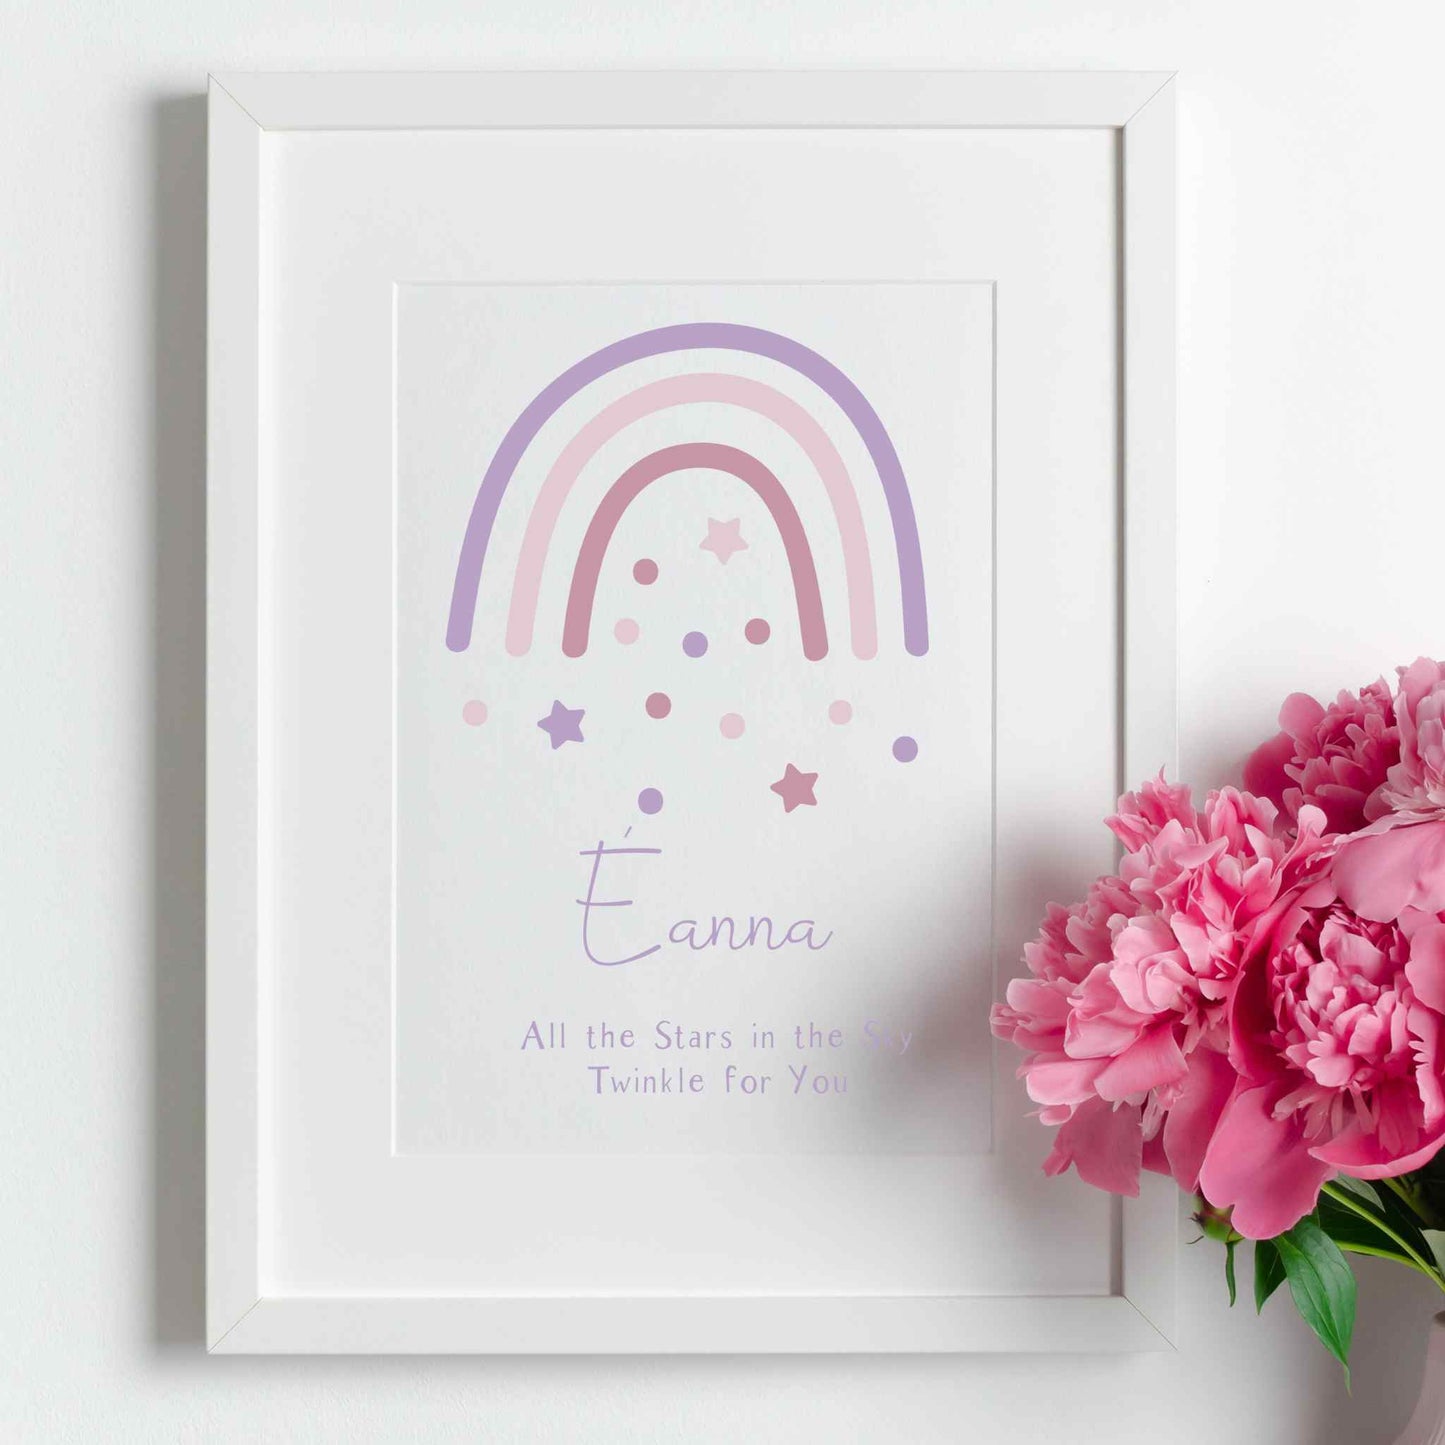 Personalised Framed Print with Purple Boho Rainbow, baby’s name, and short quote. White Frame